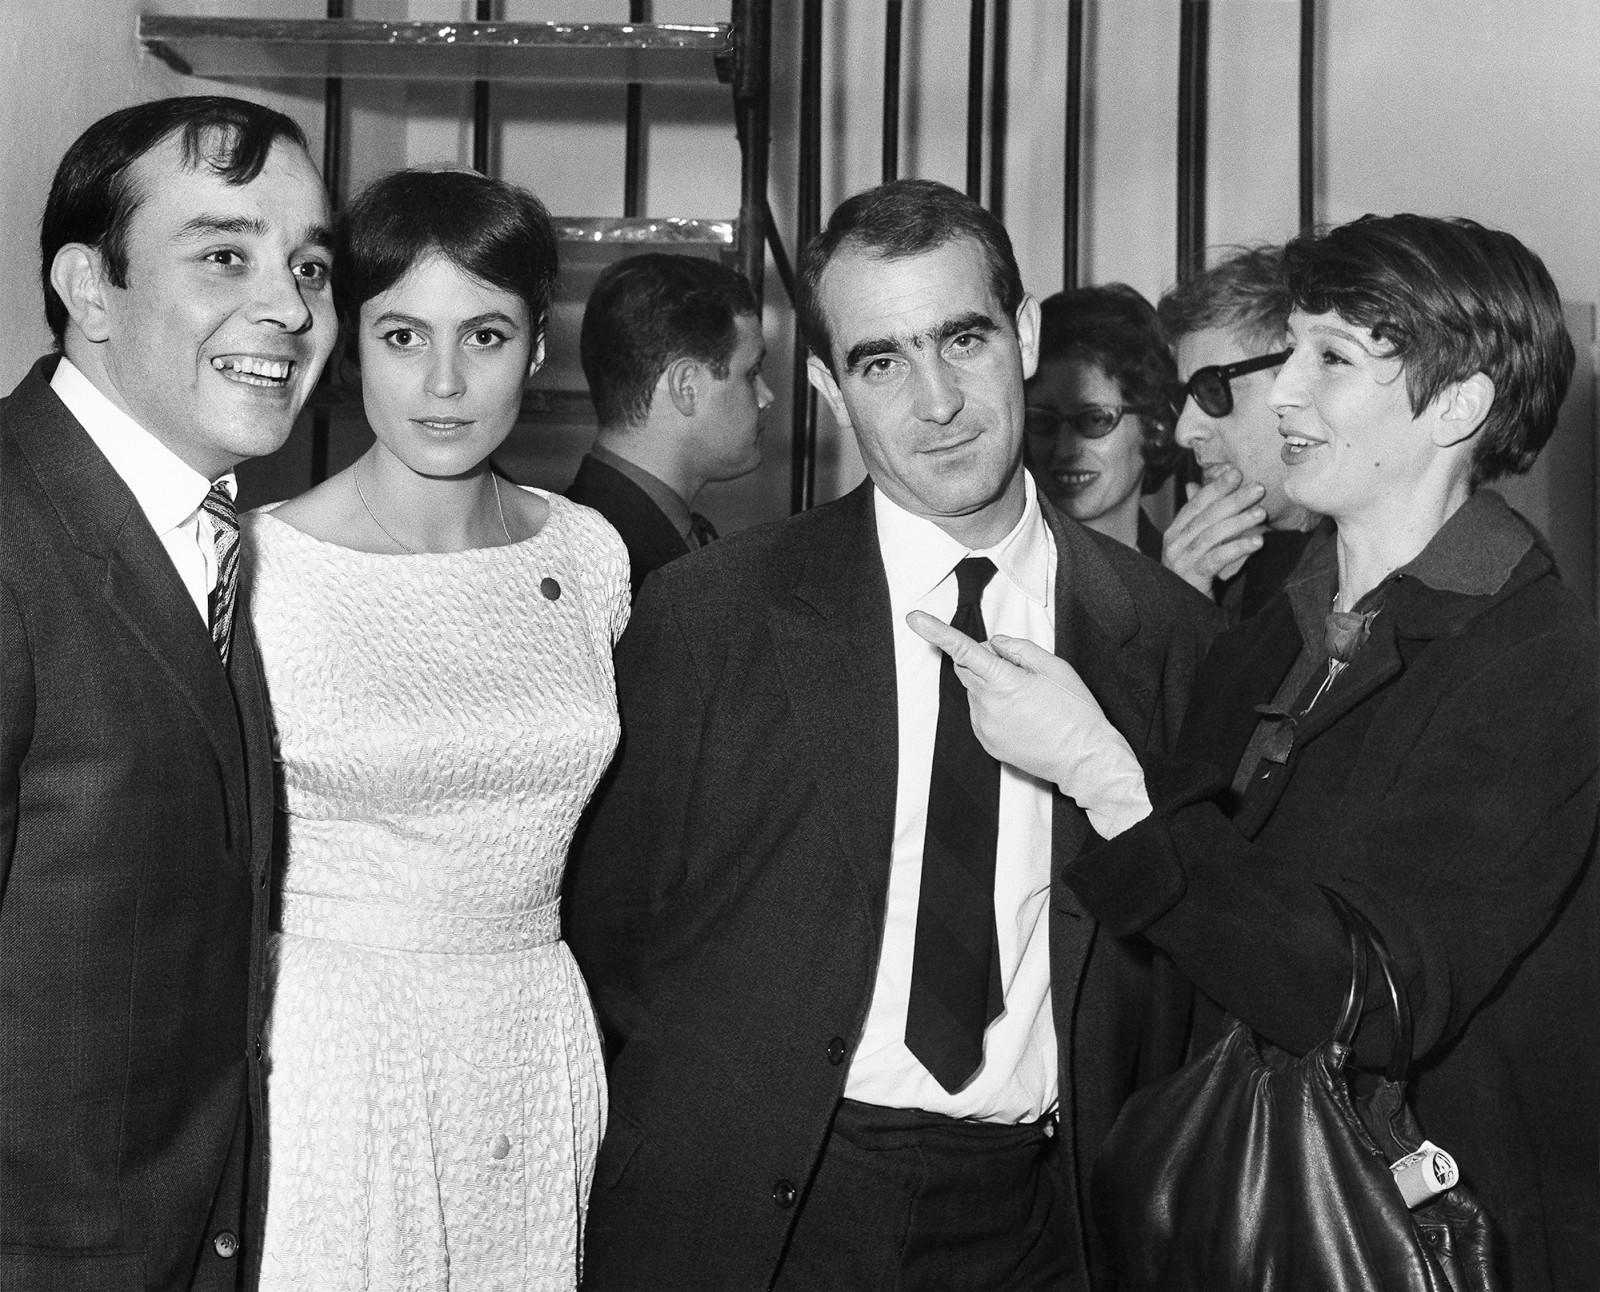 Yves Klein, Rotraut, Jean Tinguely and Eva Aeppli at the opening of the exhibition "Yves le Monochrome" at the Galerie Rive Droite